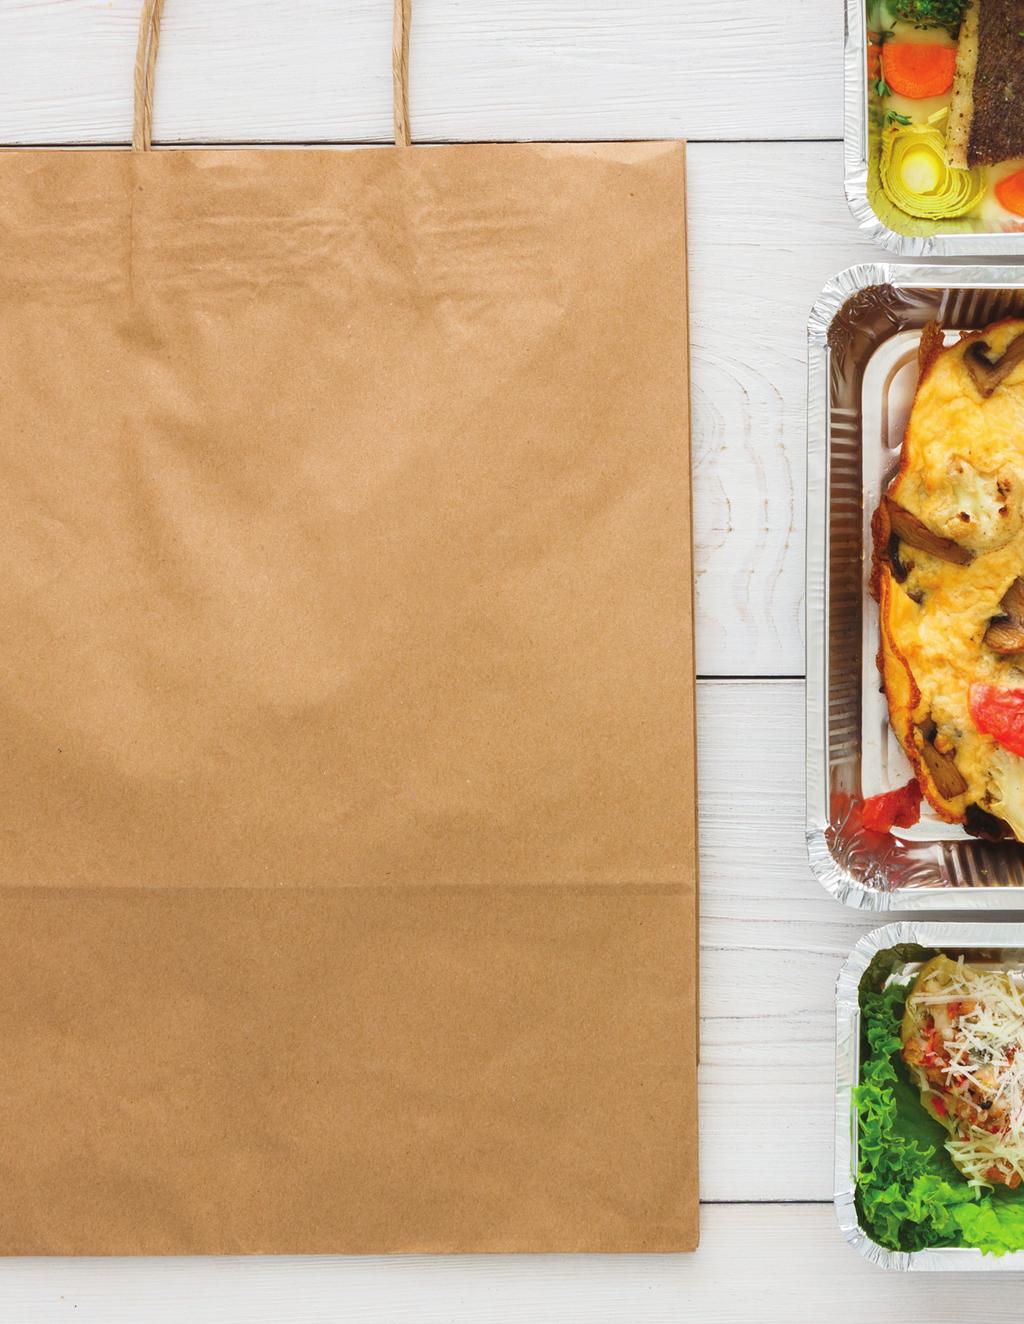 TODAY'S ONSUMER: TRENDING TOWARD DELIVERY & TAKEOUT ellphones have allowed consumers to order a meal as easily as hailing a ride from anywhere, creating a must-have revenue opportunity.